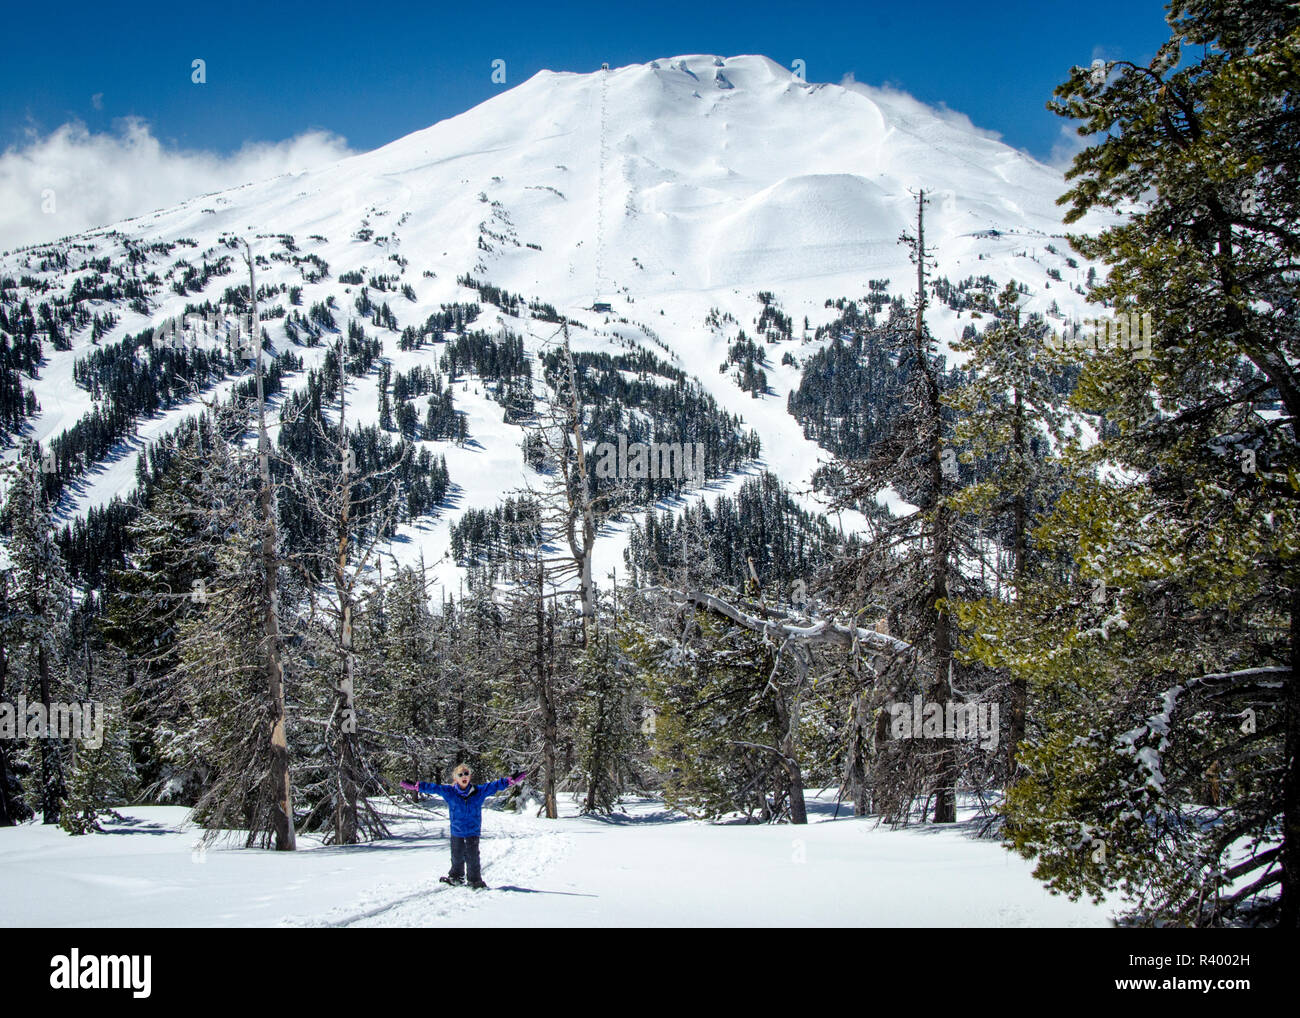 USA, Oregon, Deschutes National Forest. Snowshoeing girl and Mt. Bachelor (MR) Stock Photo